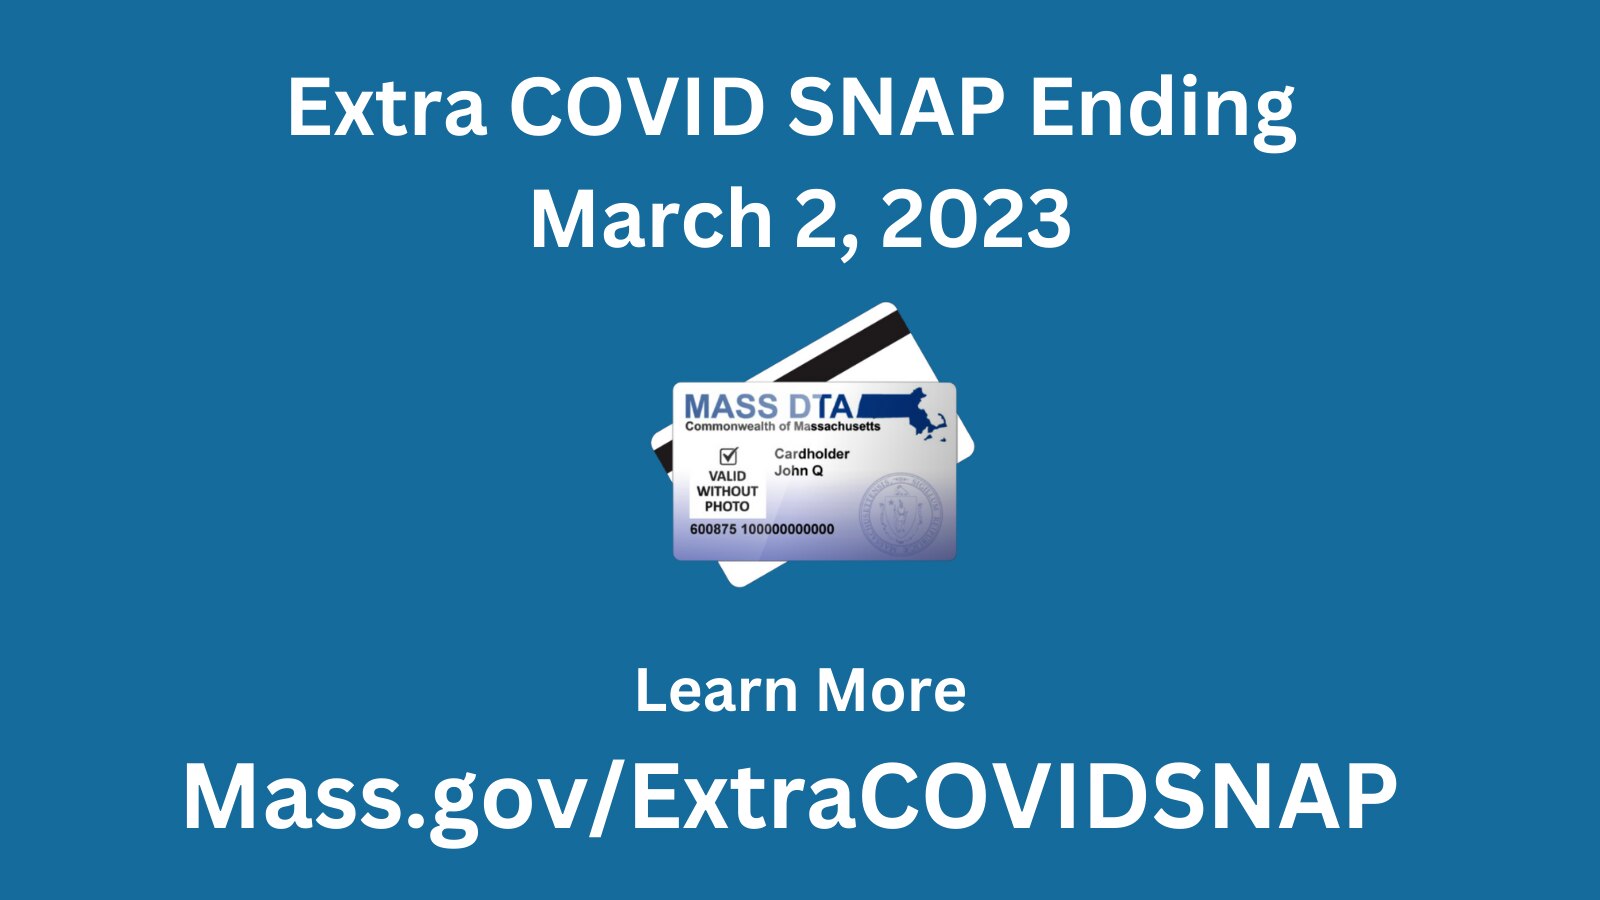 Graphic of an ebt card saying the extra covid SNAP is ending and includes the link to Mass.gov/ExtraCOVIDSNAP